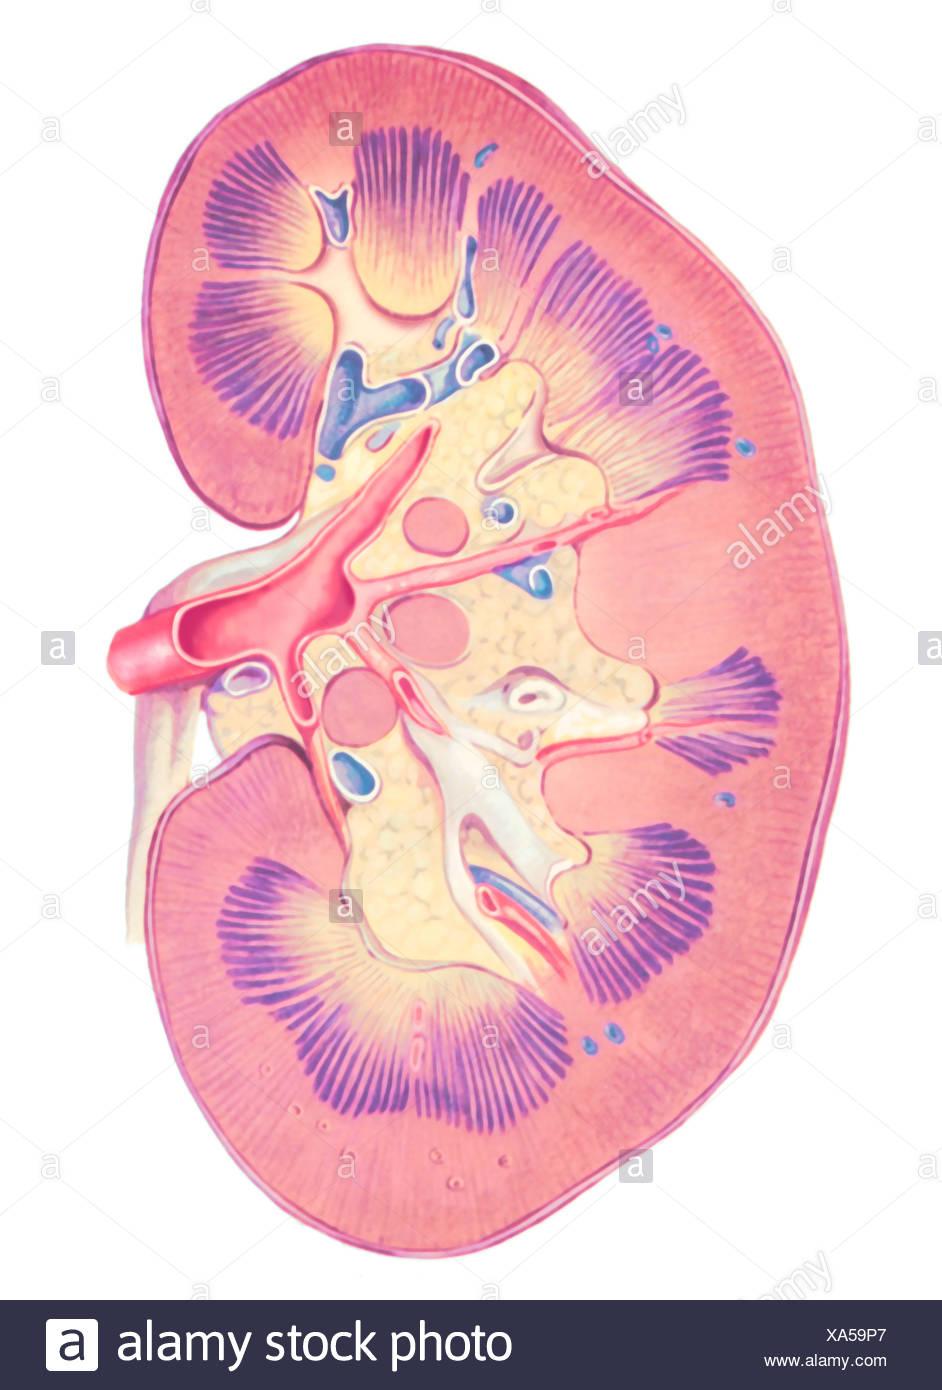 Human Kidney Cross Section High Resolution Stock Photography and Images